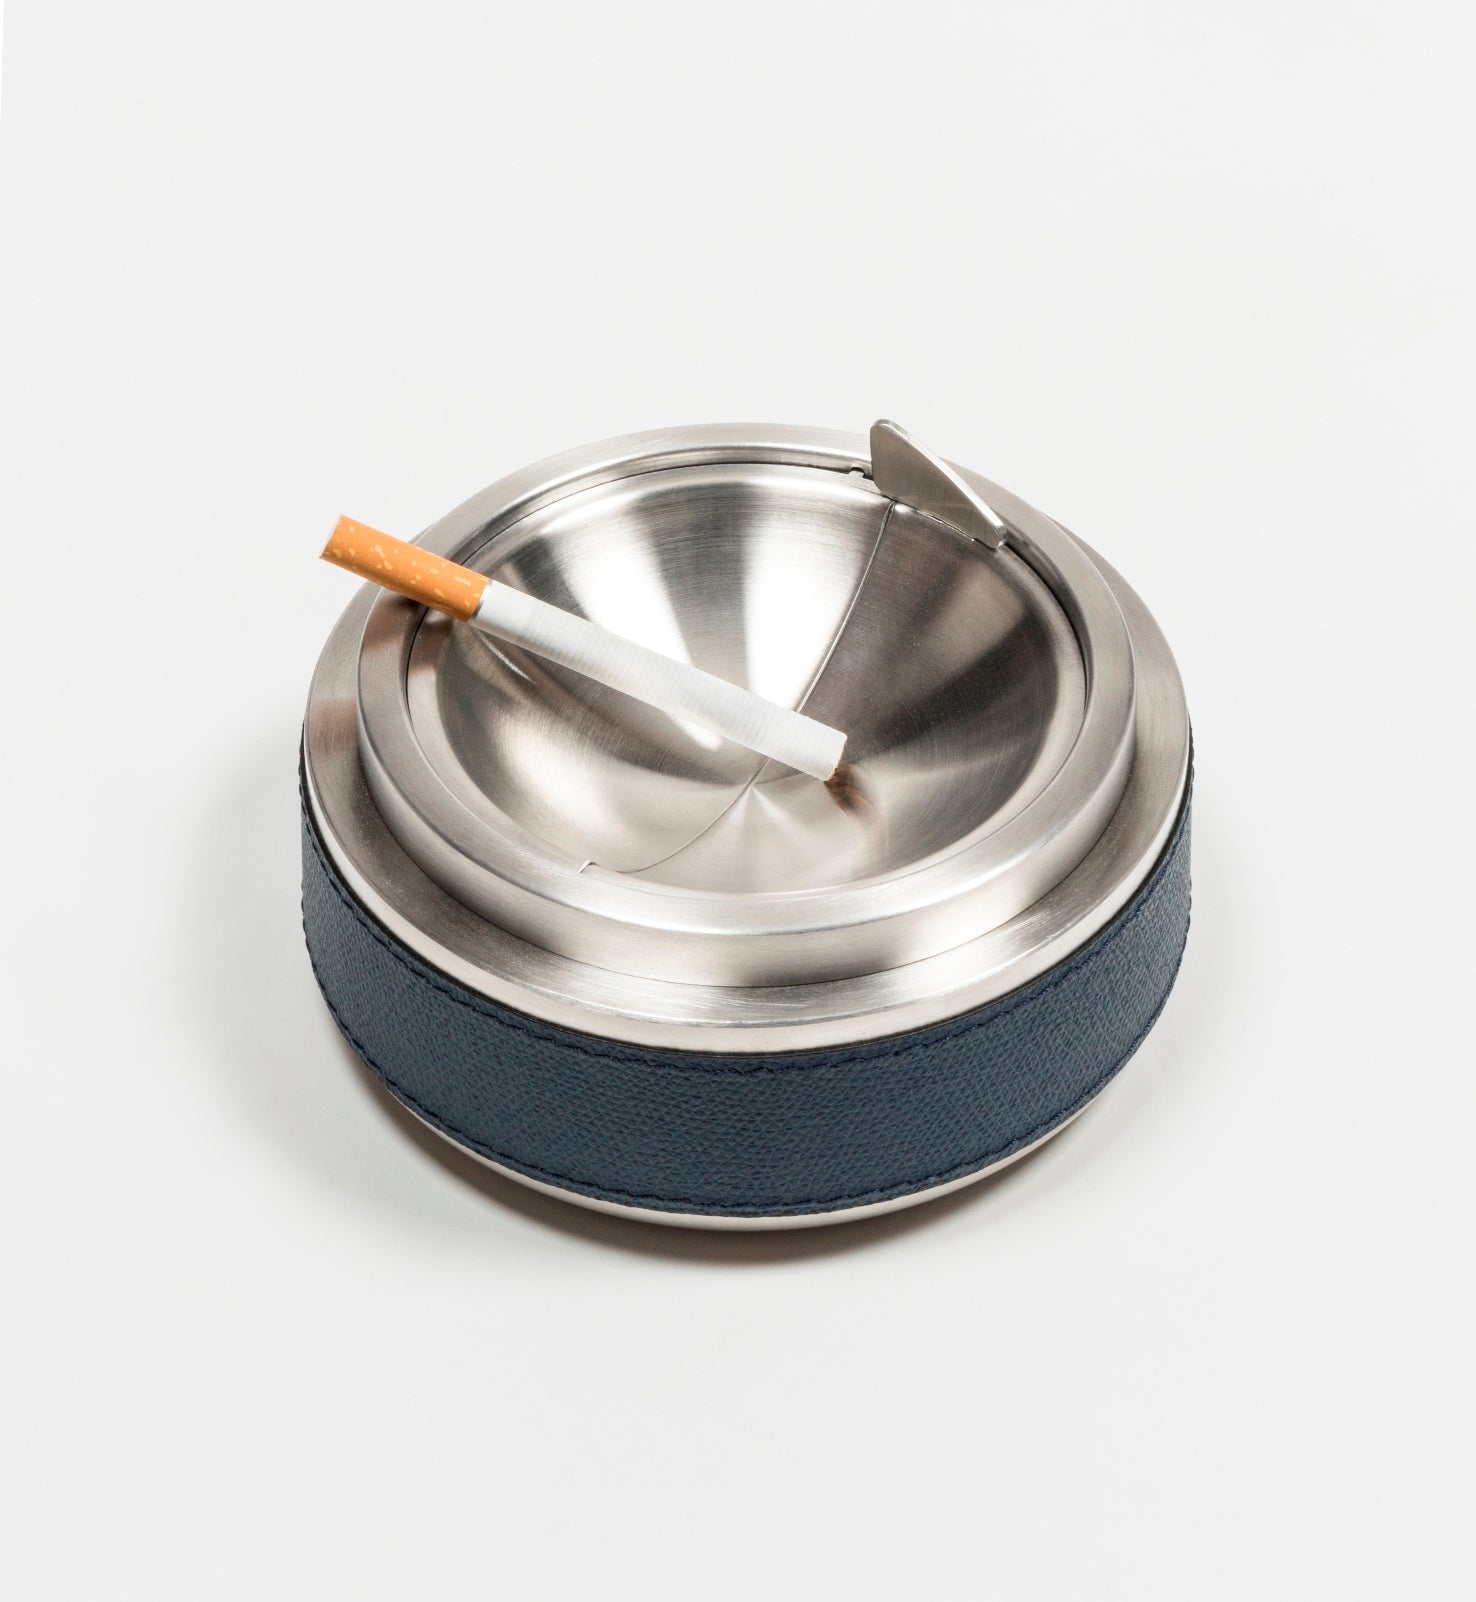 Giobagnara Libeccio Leather-Covered Tipping Ashtray | Luxury Cigar and Smoking Accessories, Sophisticated Tabletop Decor & Gift Items | 2Jour Concierge, #1 luxury high-end gift & lifestyle shop